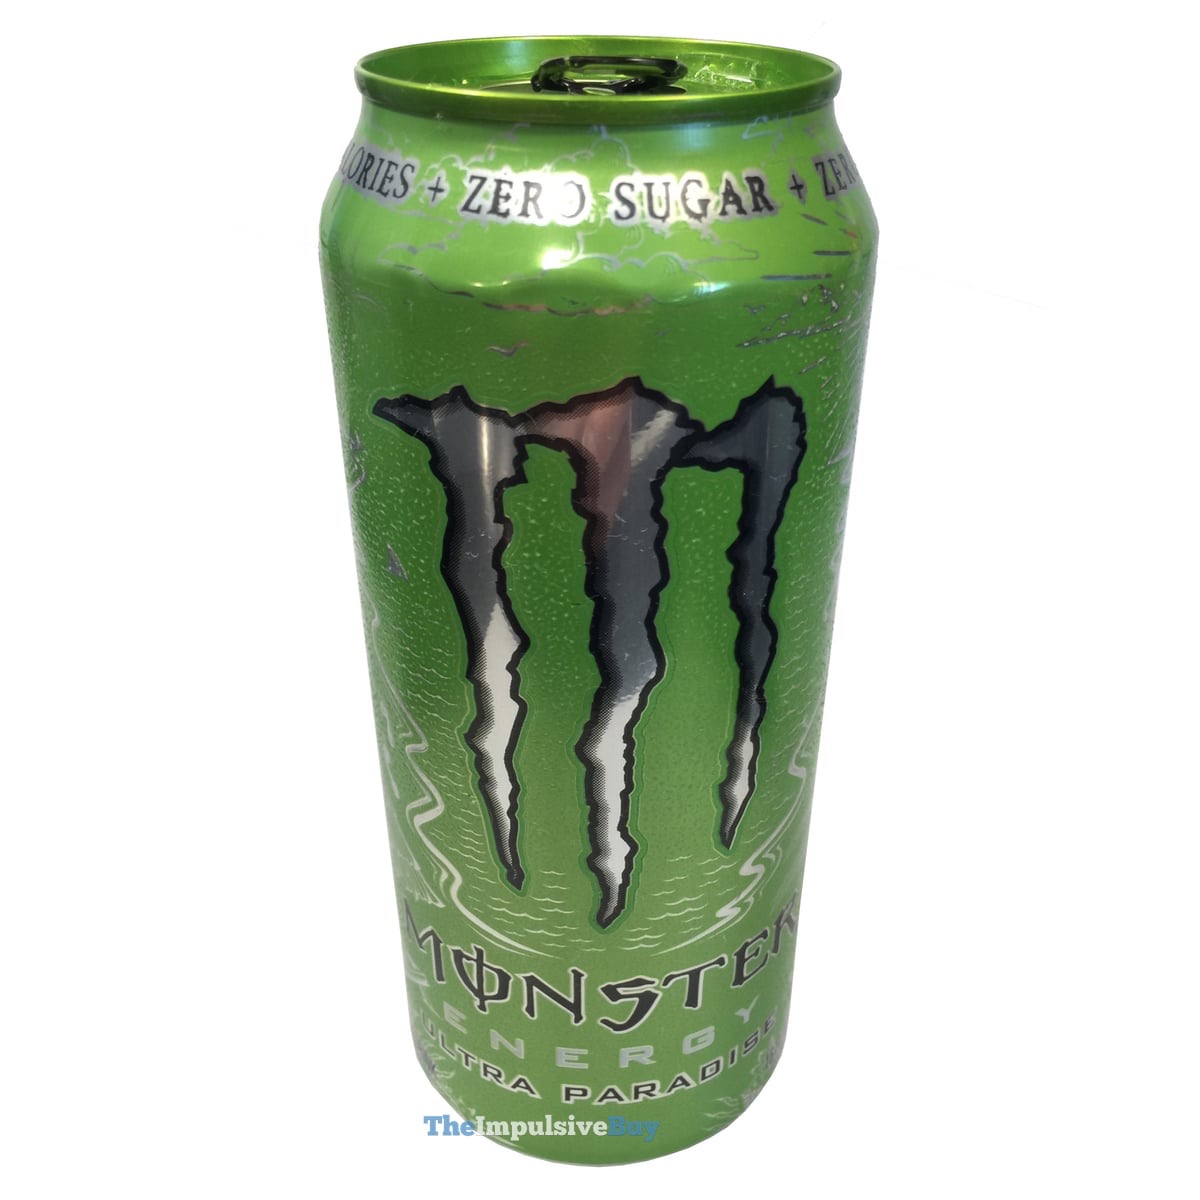 MONSTERS MY BESTEST ENERGY! THINK GREEN.